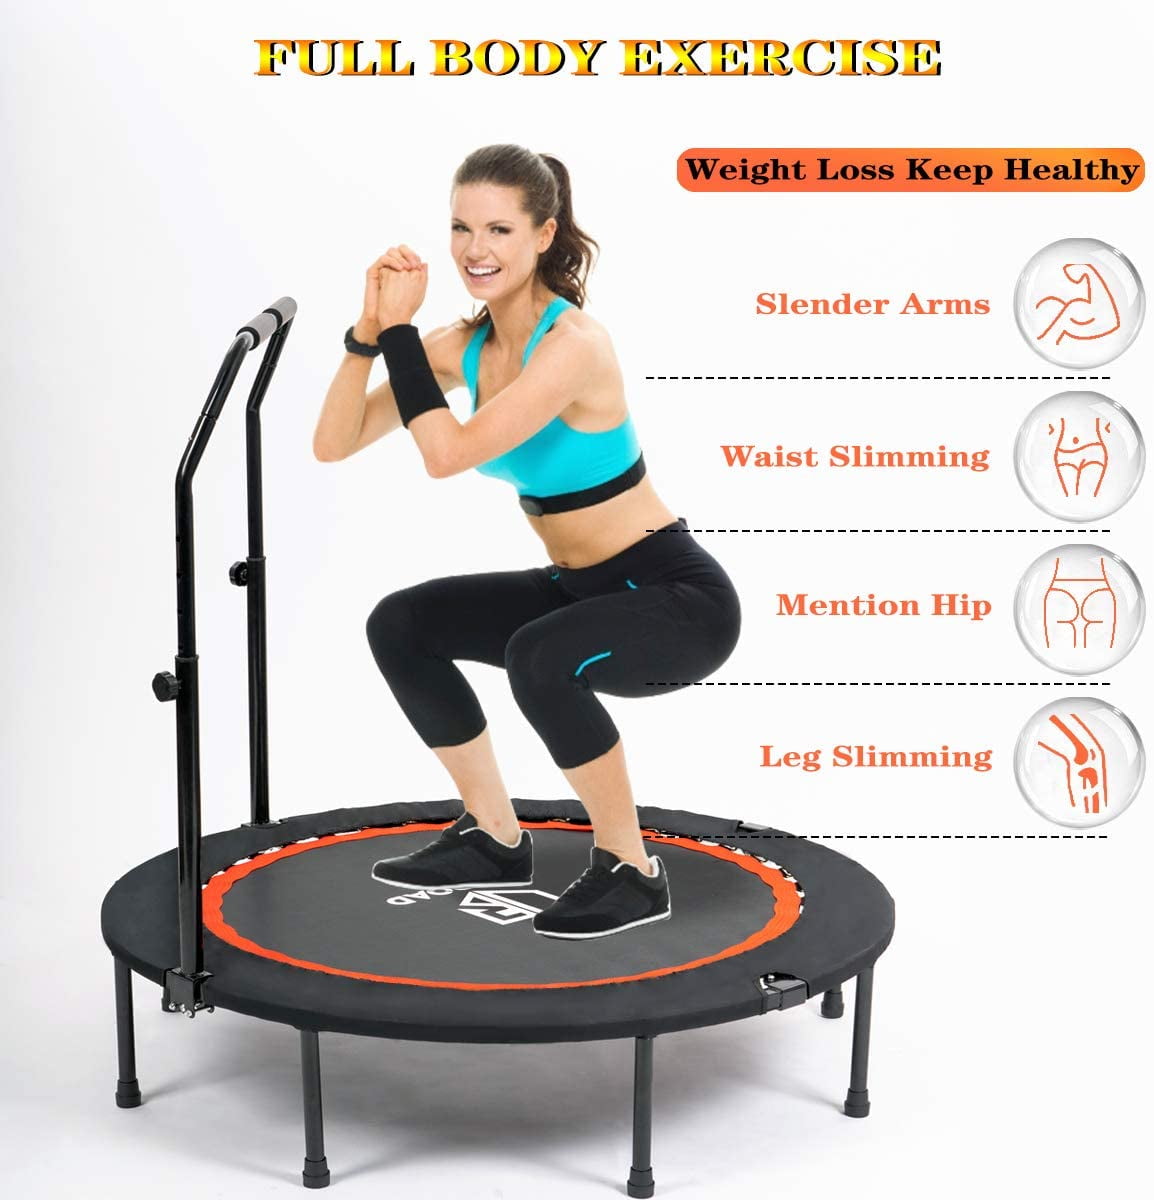 40/48 inch Foldable Mini Trampoline Fitness Rebounder with Adjustable Foam Handle Exercise Trampoline for Adults Outdoor Indoor Garden Workout - Walmart.com